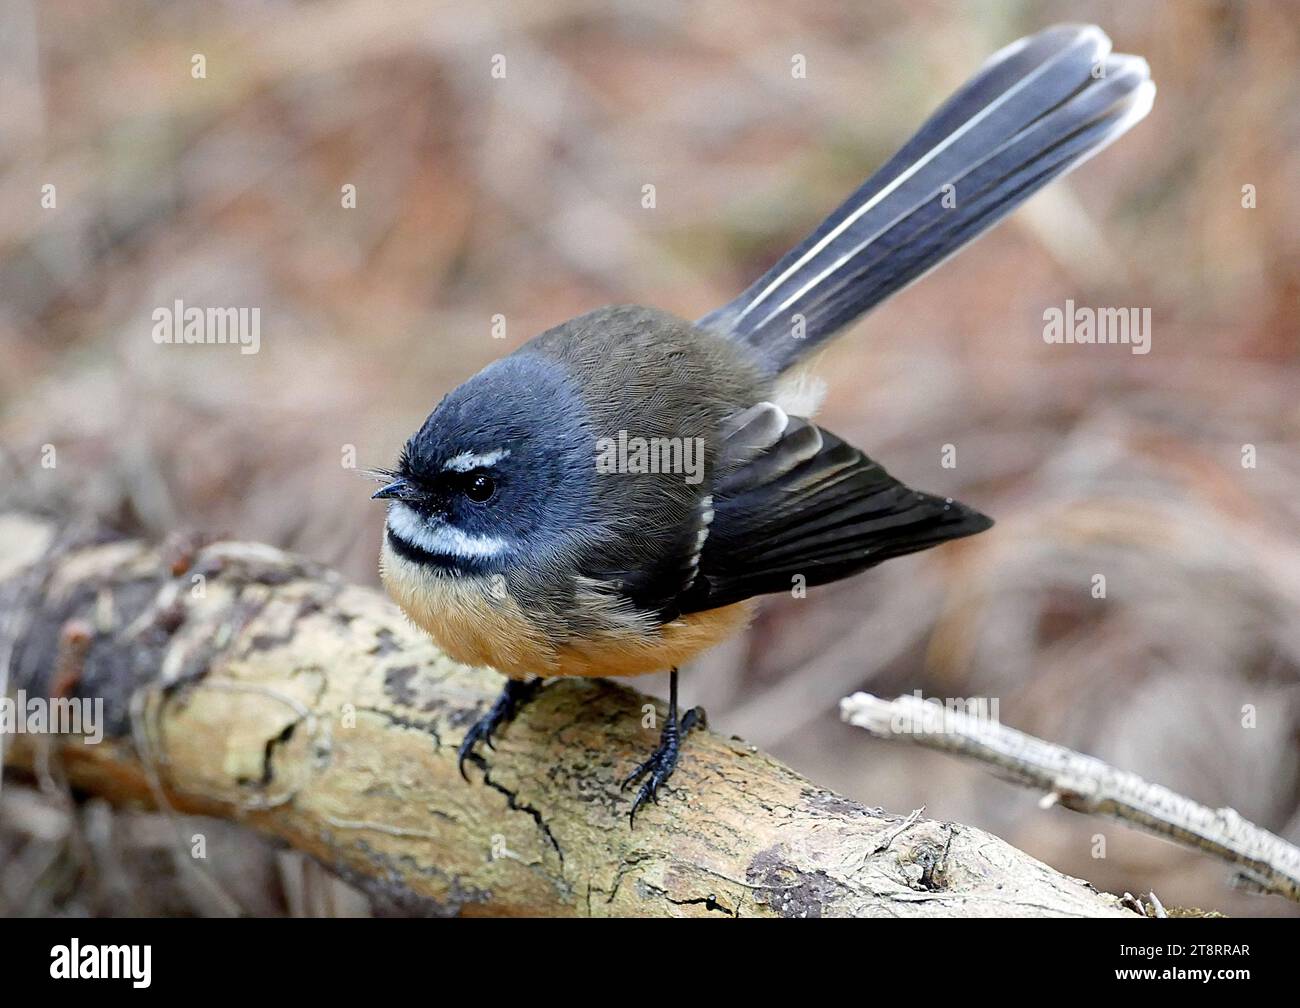 New Zealand fantail. (Rhipidura fuliginosa), The fantail is one of New Zealands best known birds, with its distinctive fanned tail and loud song, and particularly because it often approaches within a metre or two of people. Its wide distribution and habitat preferences, including frequenting well-treed urban parks and gardens, means that most people encounter fantails occasionally. They can be quite confiding, continuing to nest build or visit their nestlings with food when people watch quietly. There are two colour forms or morphs of fantail Stock Photo